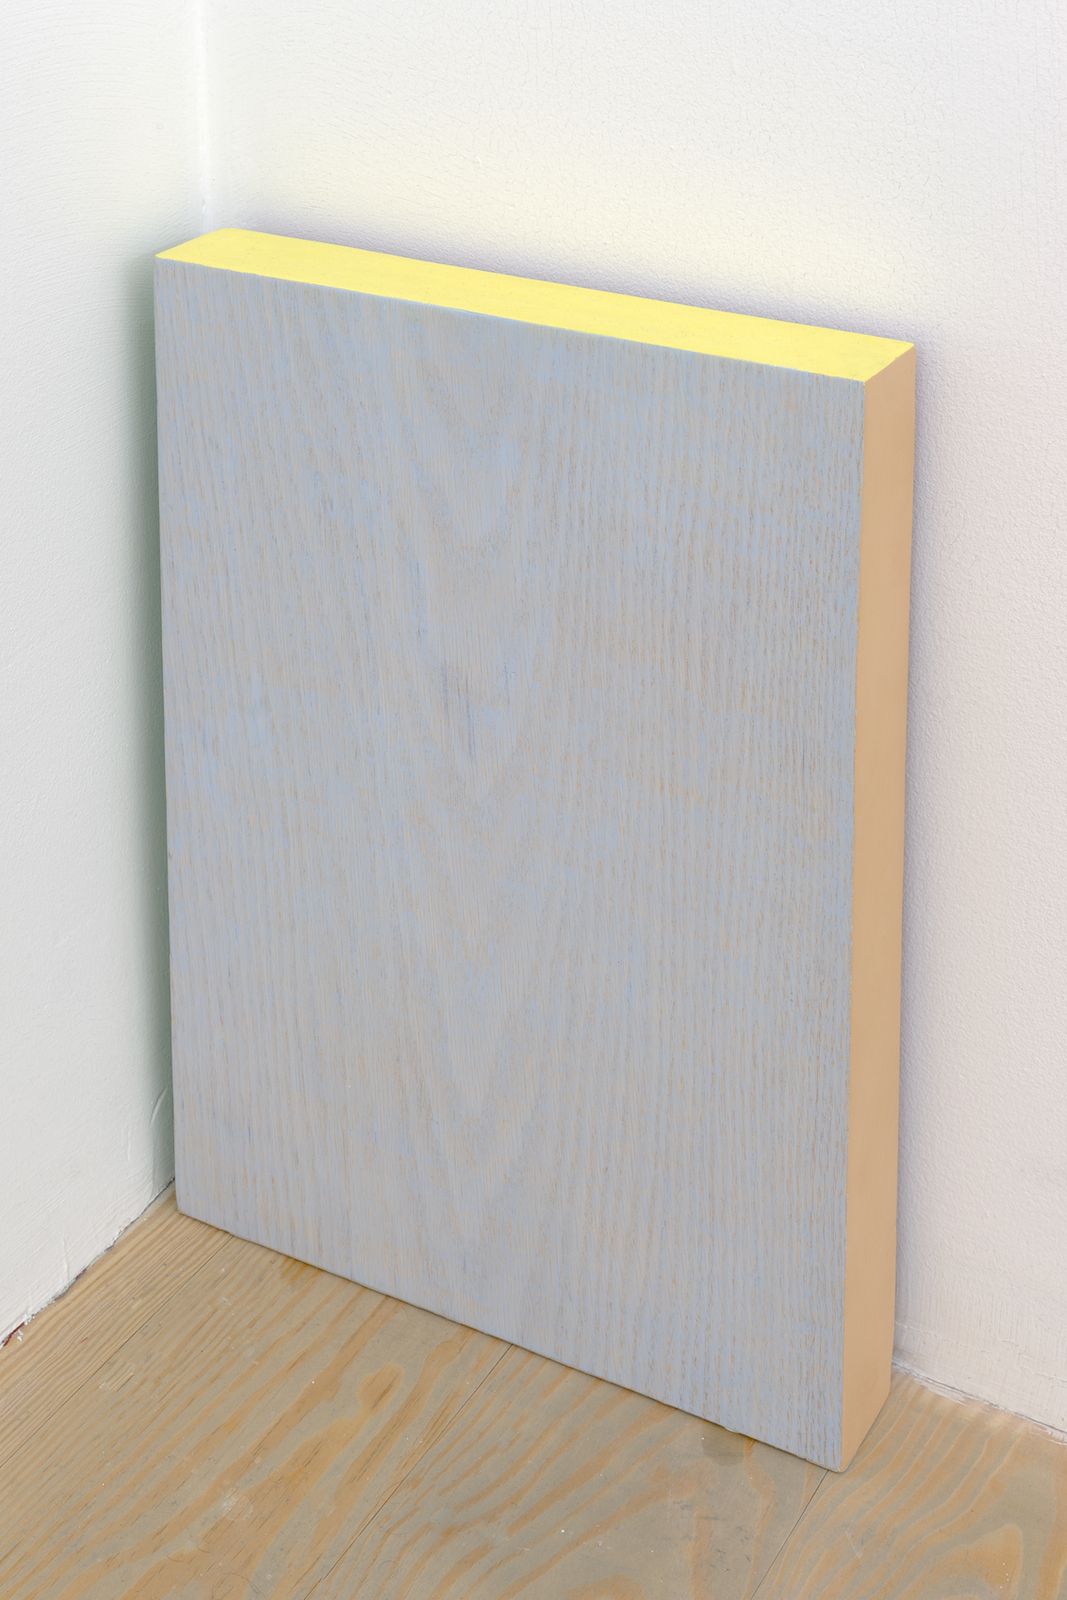 Gordon Hall, Set (IV), 2014, acrylic, watercolor, colored pencil, dyed wood filler, fabric on wood, set of two, 16 1⁄4 × 11 1⁄2 × 2 in.